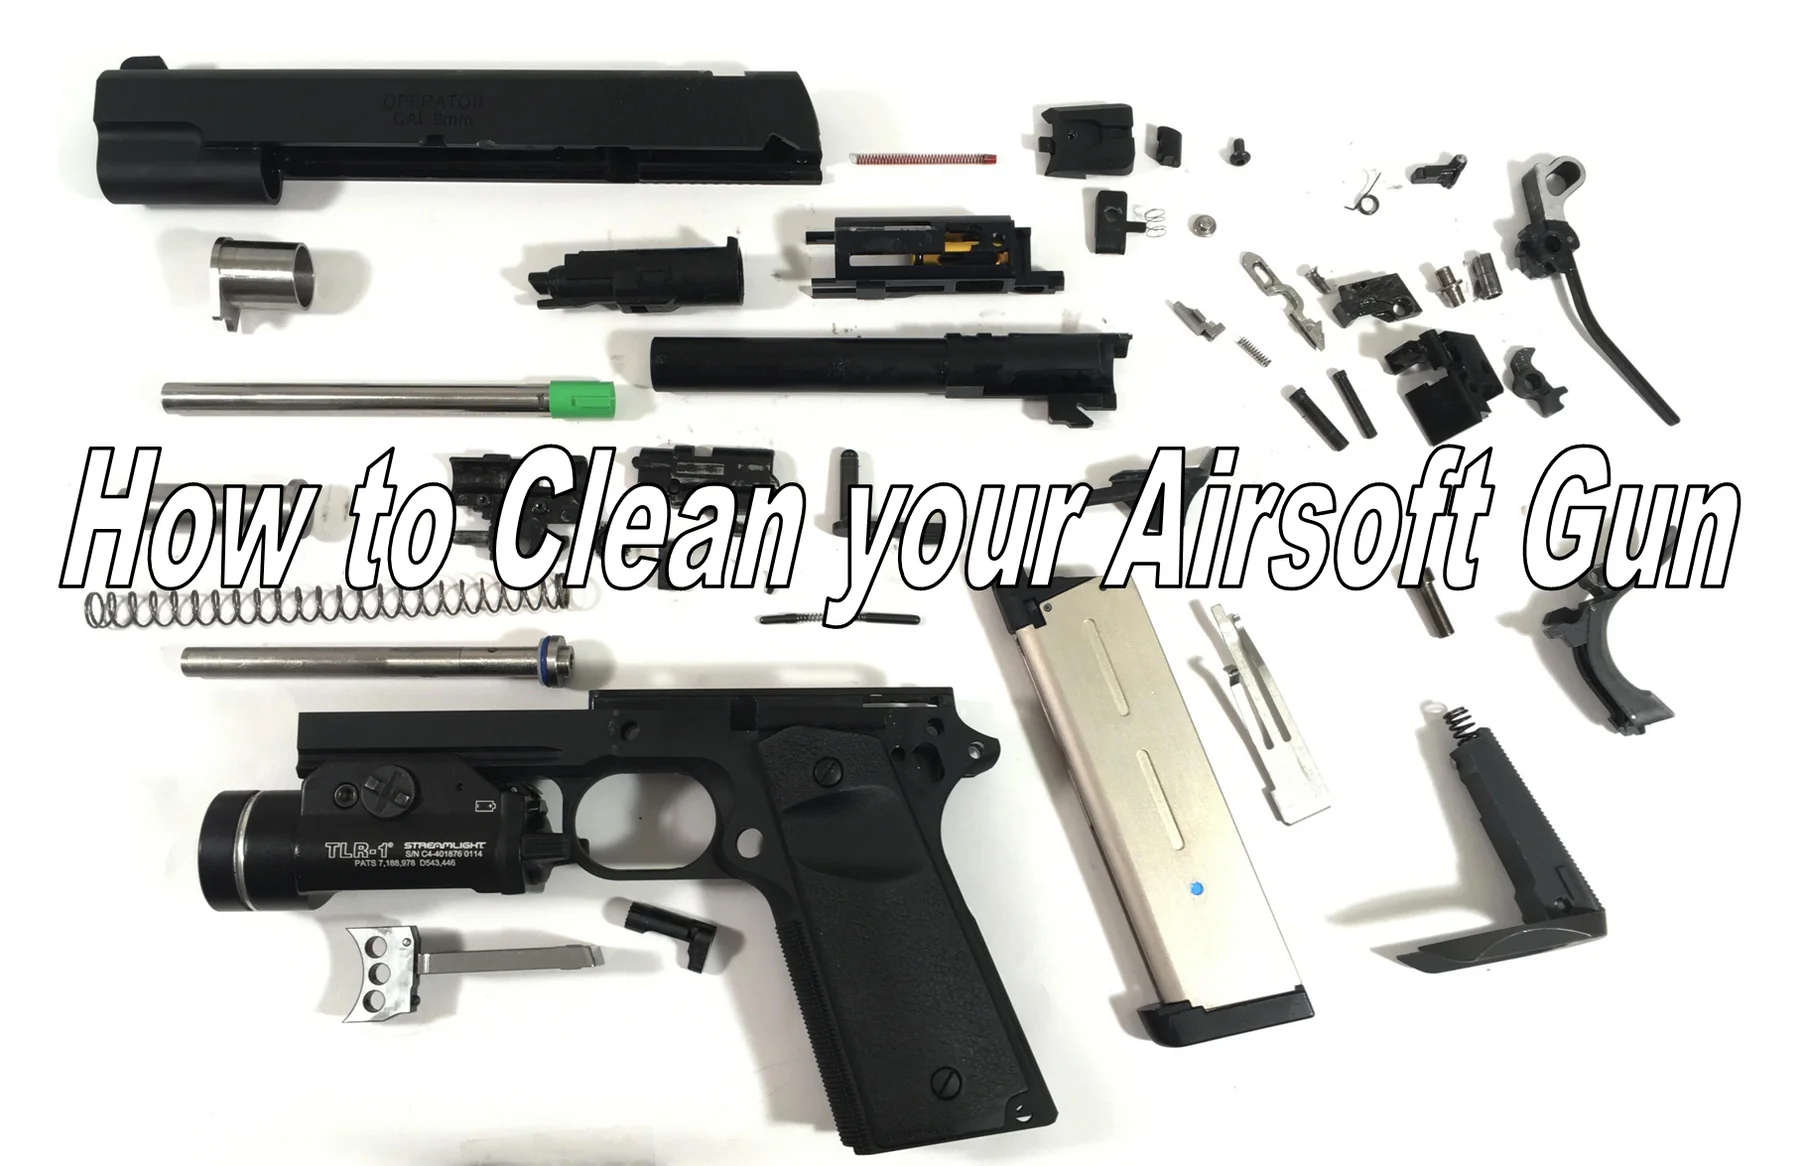 How to Clean Your Airsoft Gun